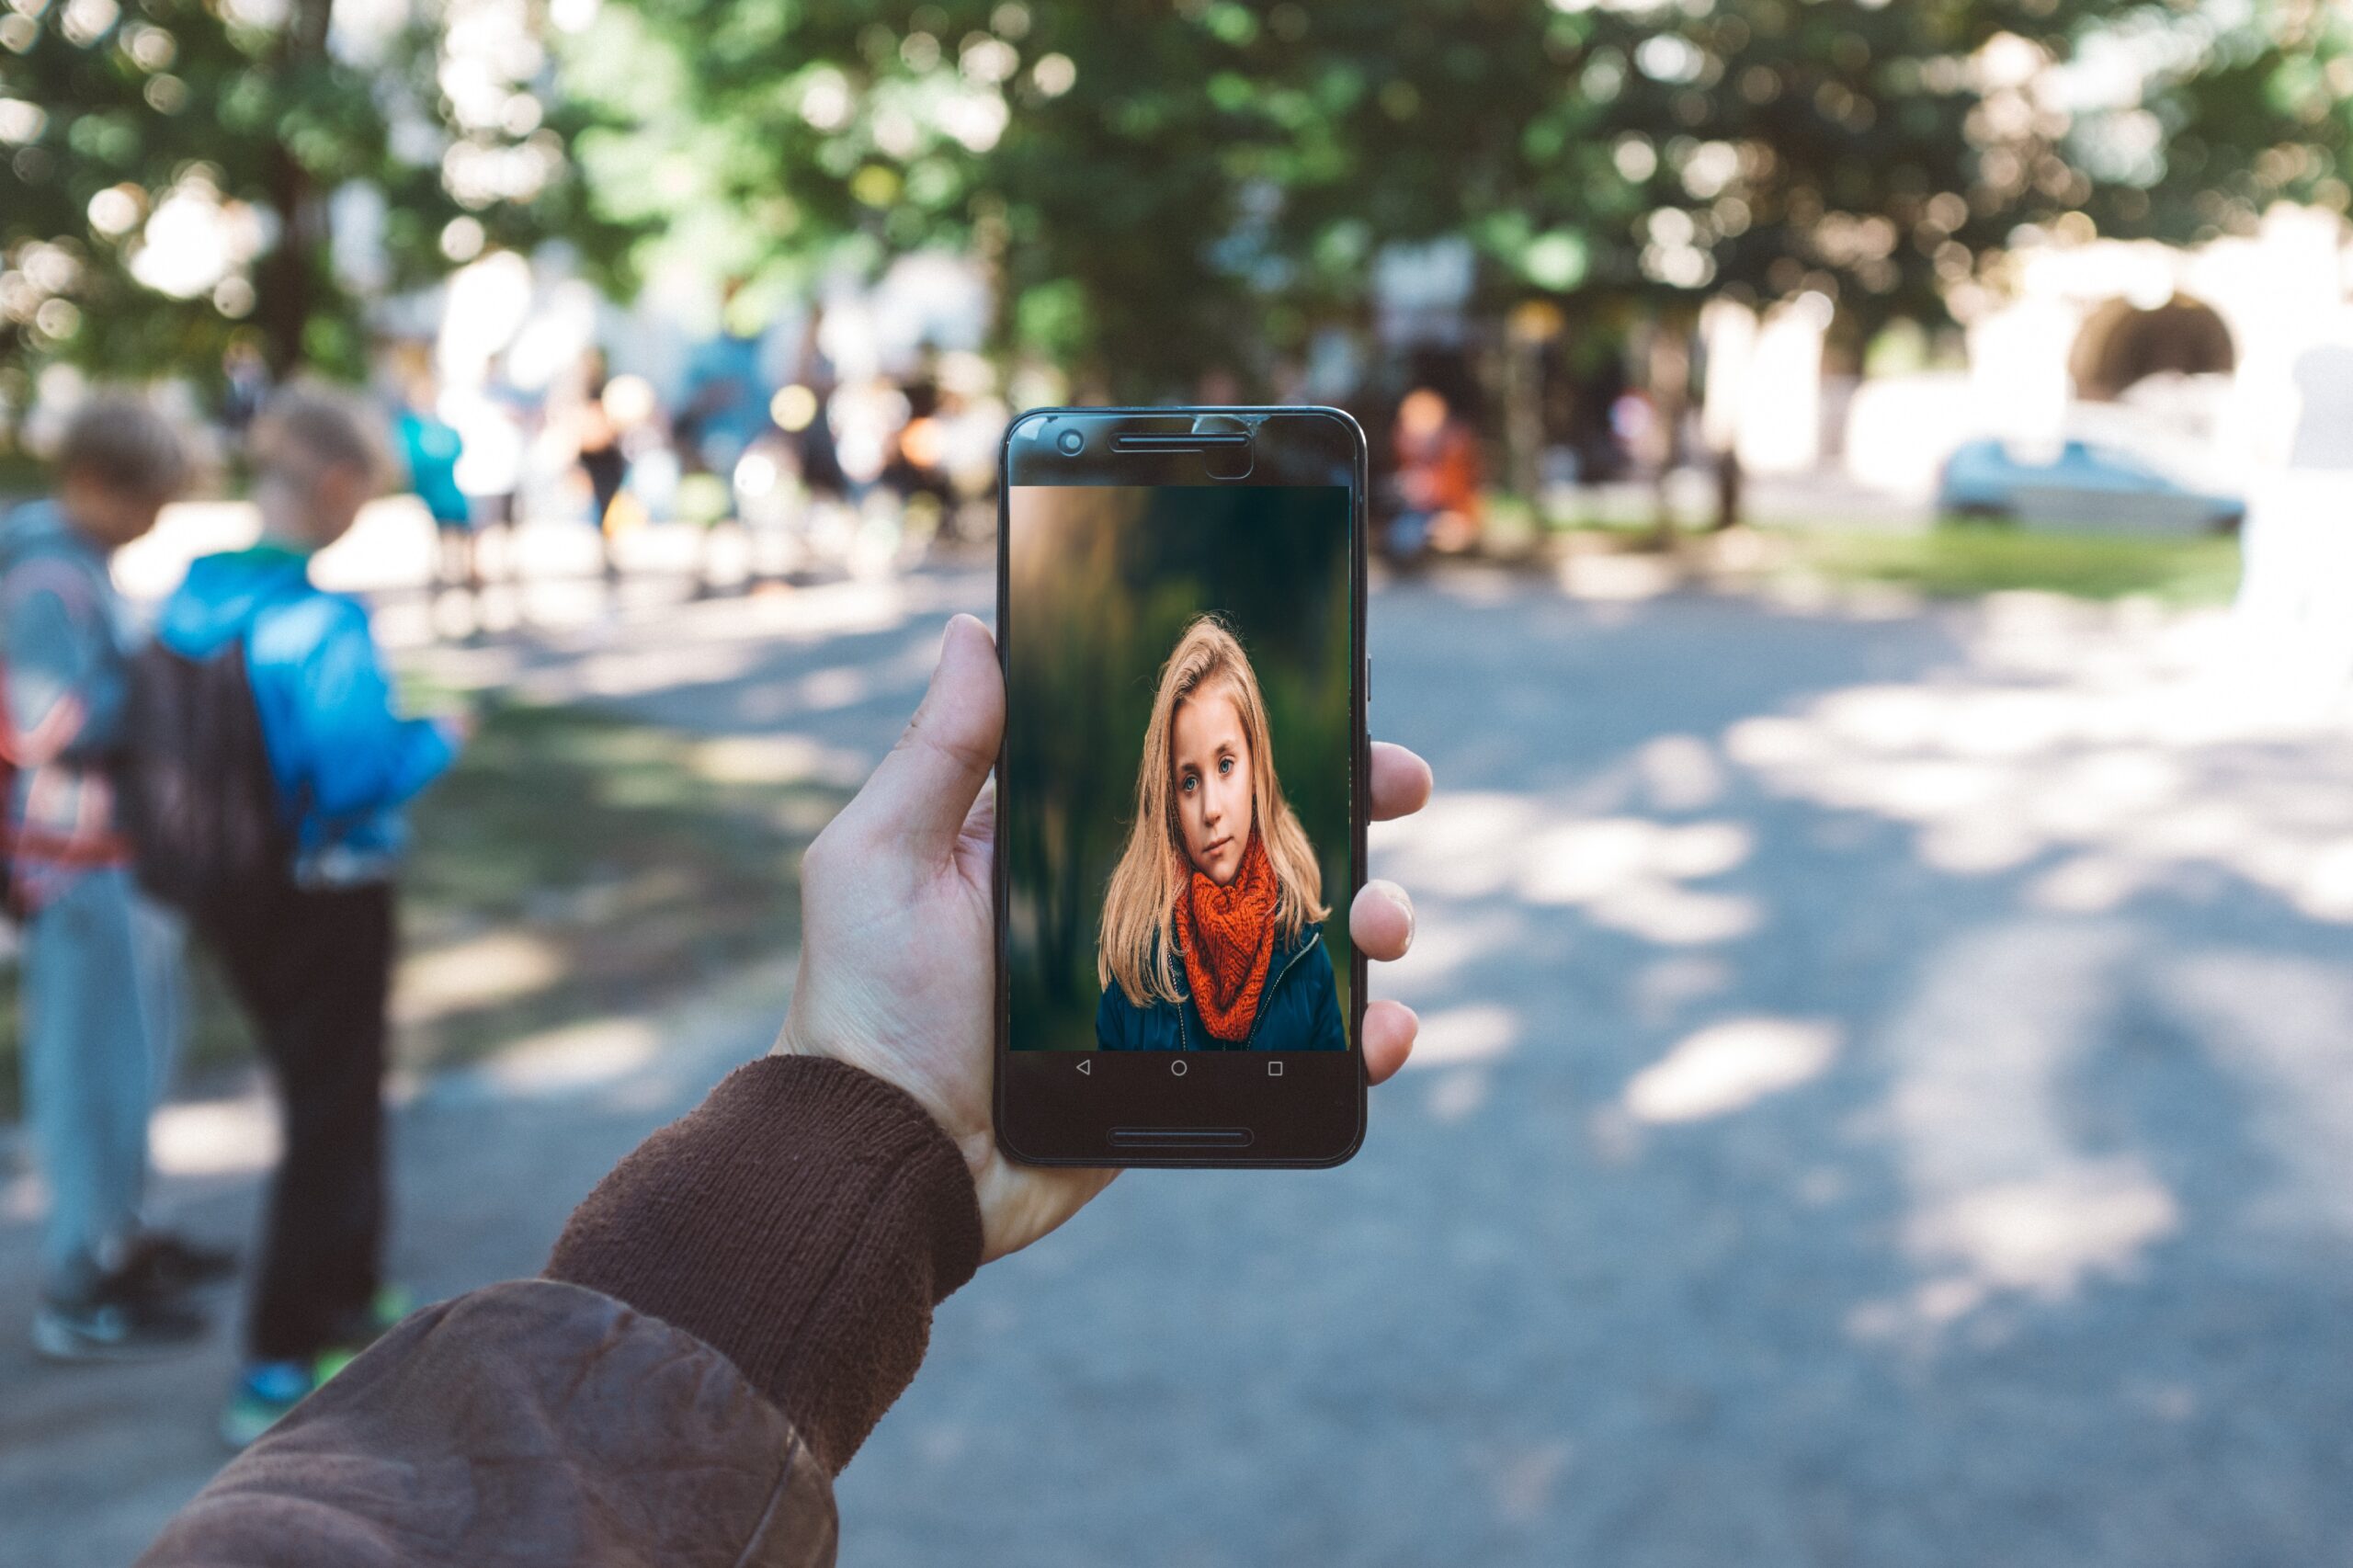 A man's arm holding a cell phone with the image of a young girl. Background shows a park with multiple children.